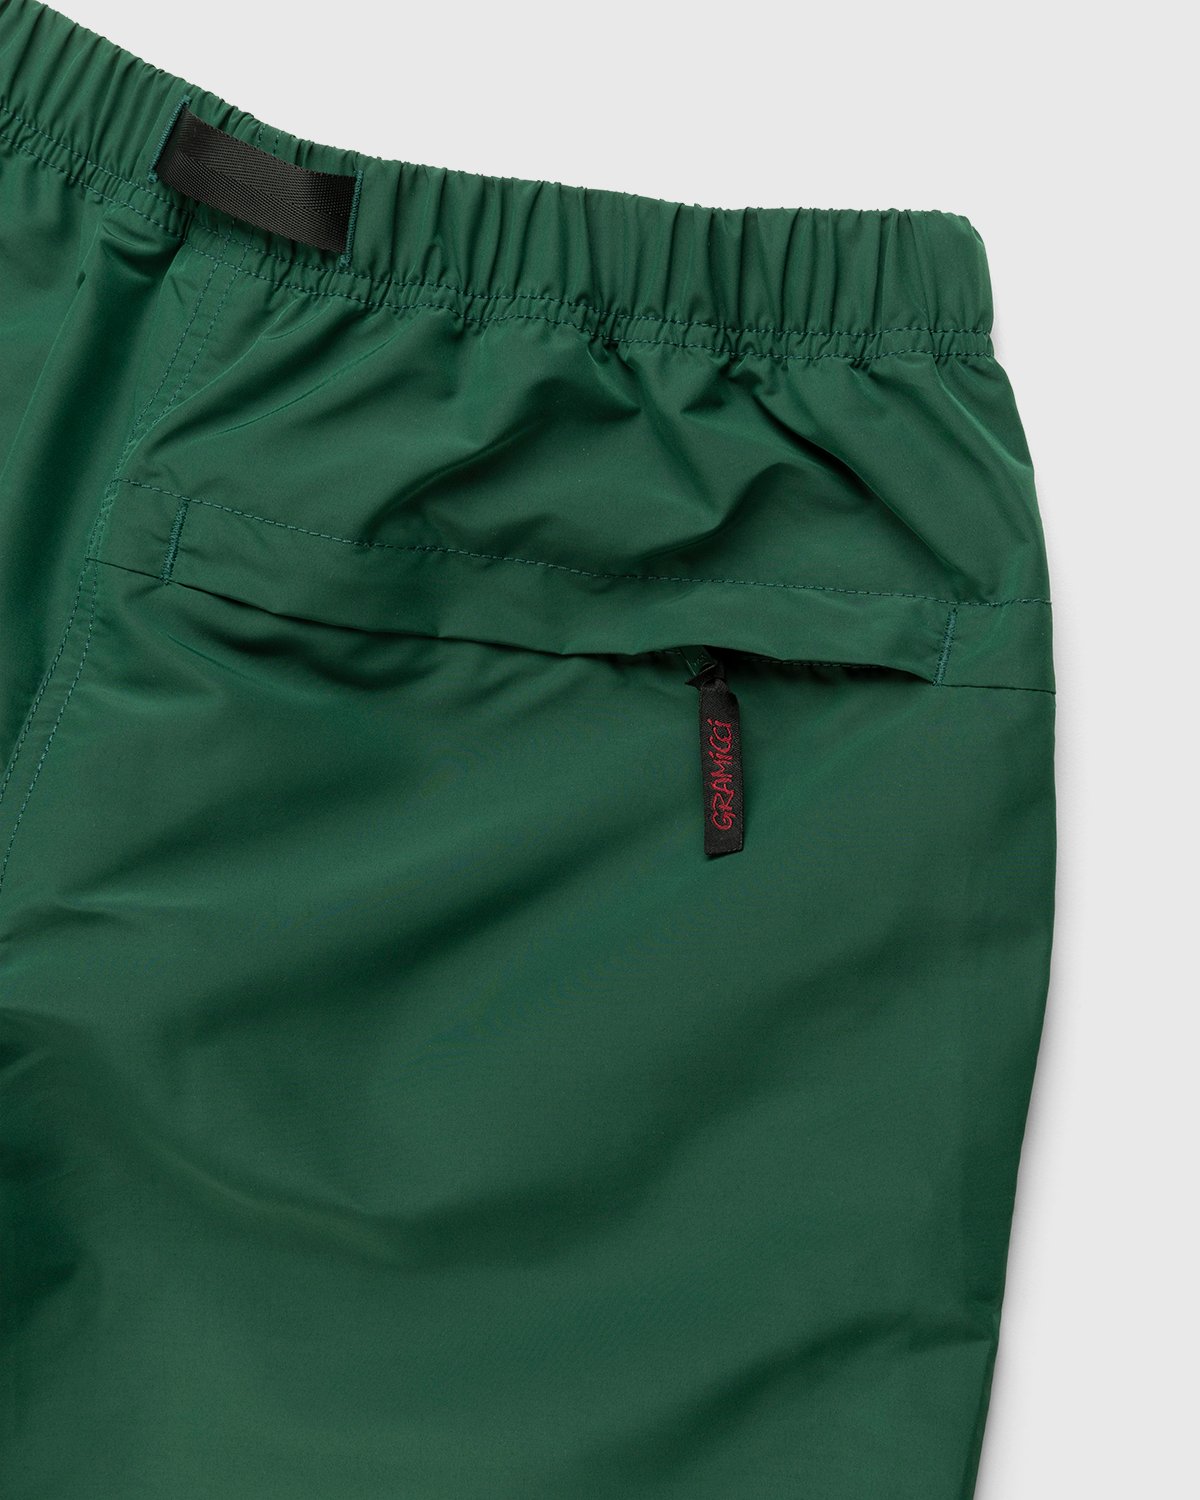 Gramicci x Highsnobiety - HS Sports Shell Packable Shorts Forest Green - Clothing - Green - Image 4